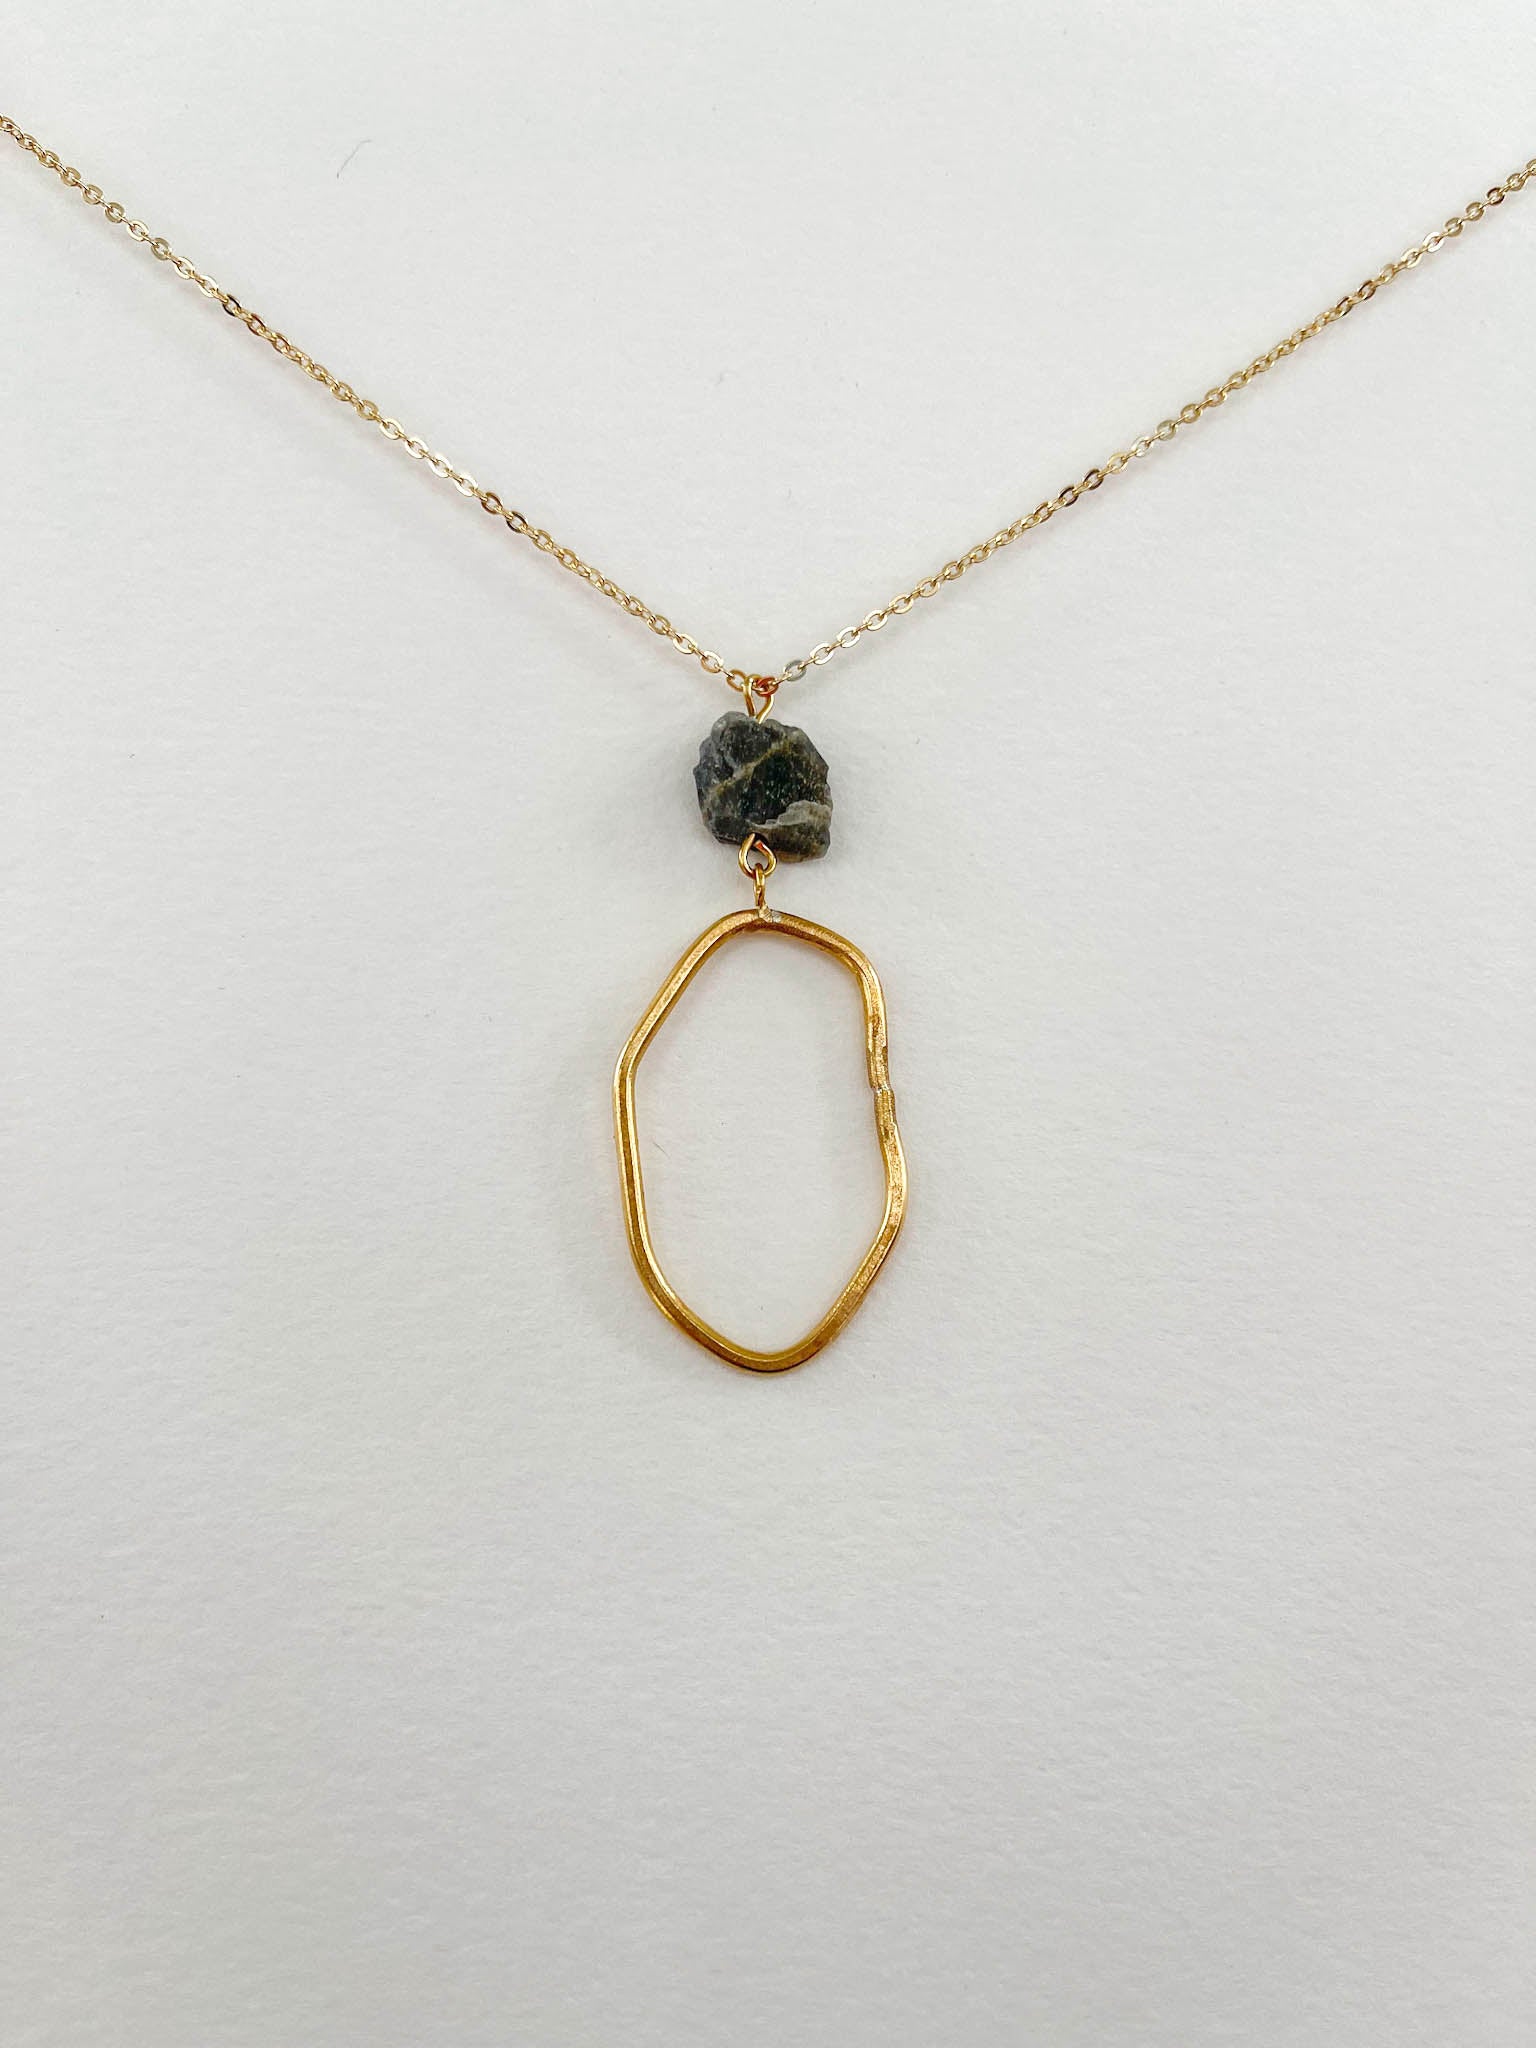 Long Freeform Necklace with Raw Labradorite Accent